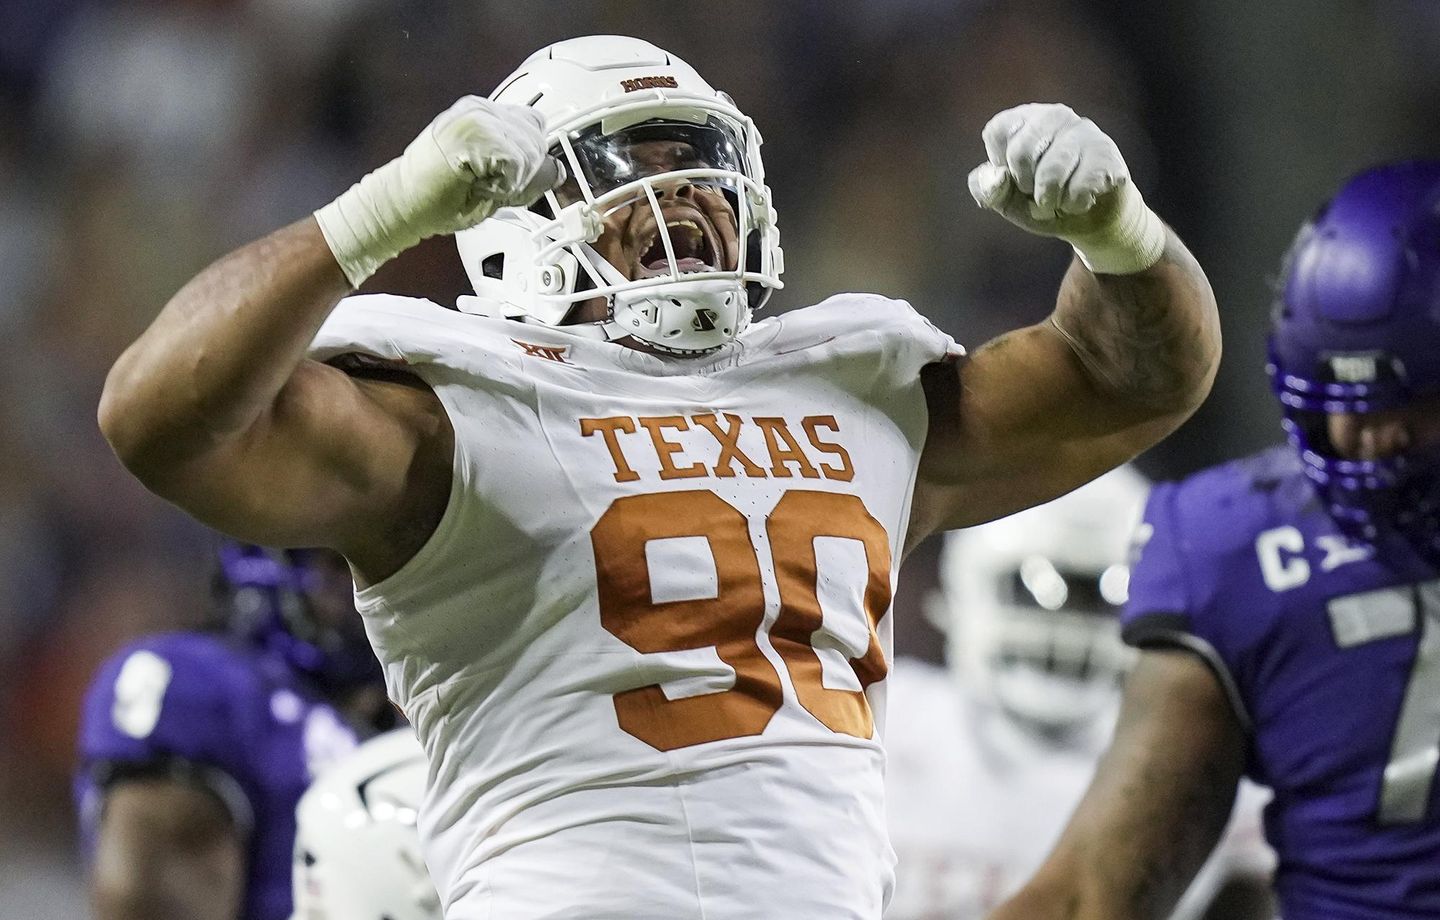 NFL draft: Top defensive players on the board
